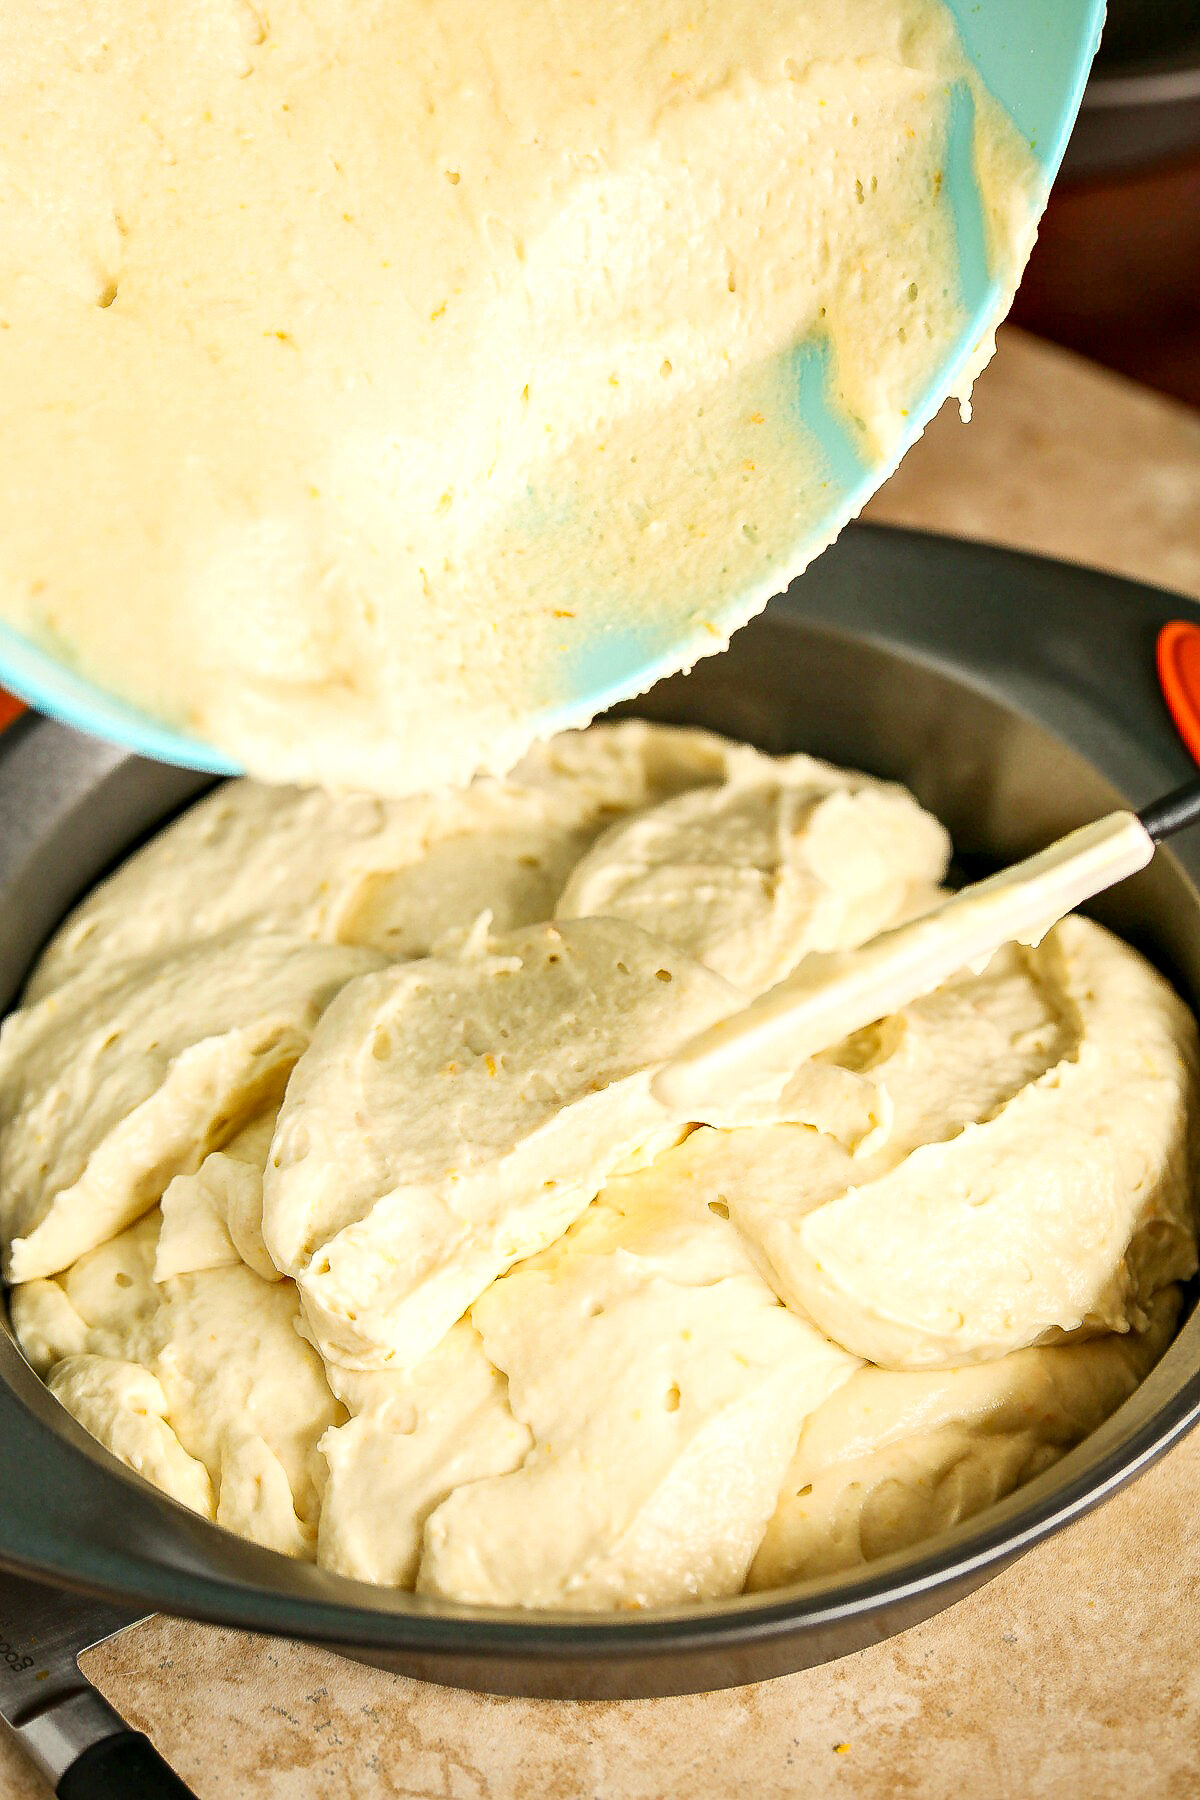 Pouring batter into the cake pan.